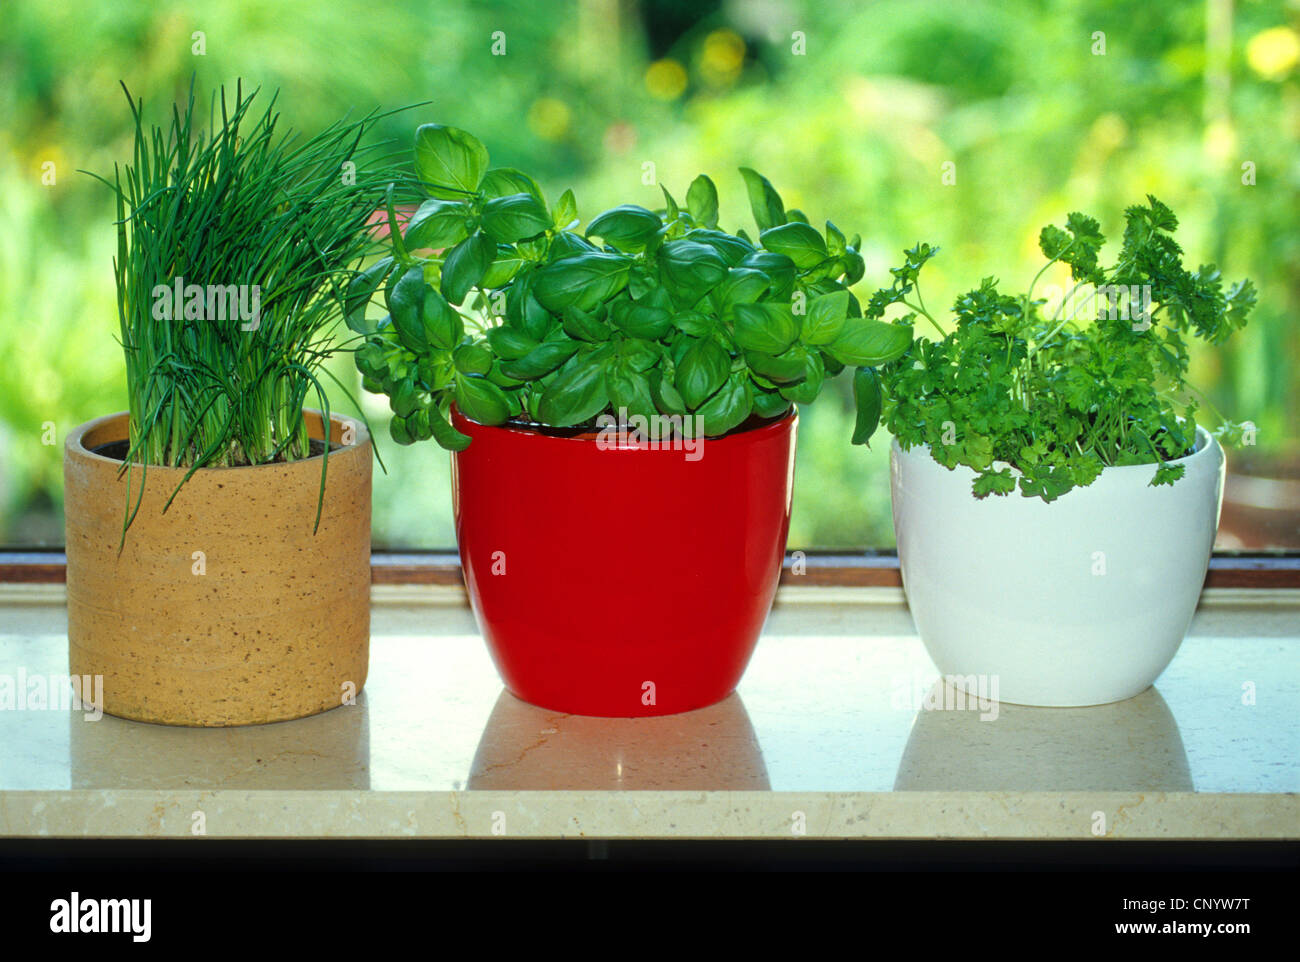 chives, sweet basil and parsley on a window-sill Stock Photo